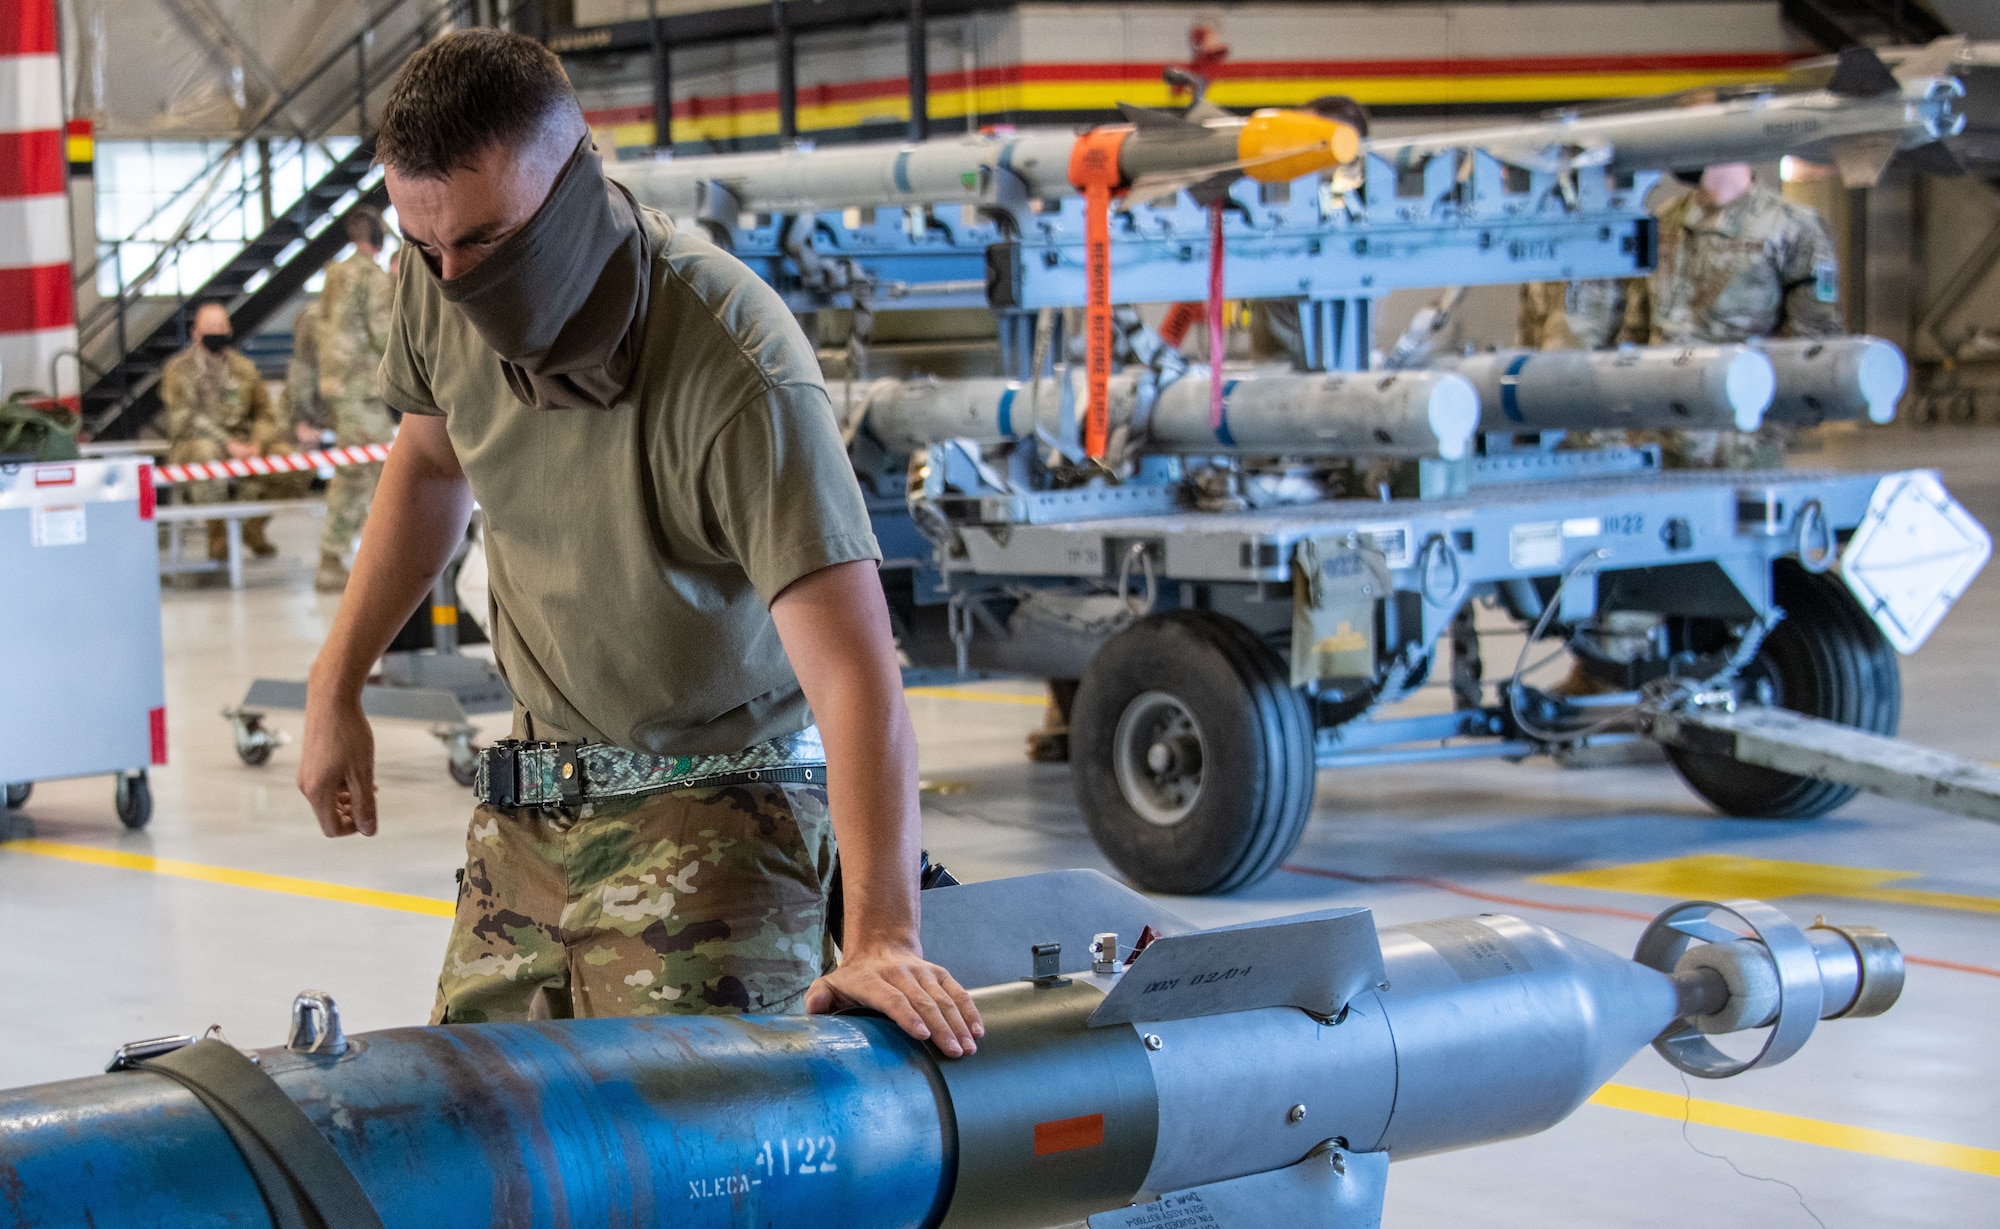 U.S. Air Force Master Sgt. Jonathan Thorsted from the 419th Aircraft Maintenance Squadron ensures an unarmed GBU-12 Pave Way bomb is properly secured before loading it onto an F-35A Lightning II during a weapons load competition at Hill Air Force Base, Utah on Sept. 24, 2021. The quarterly competition focuses on speed, accuracy, and safety, ensuring standard loading procedures and proficiency across the wings. (U.S. Air Force photo by Senior Airman Erica Webster)